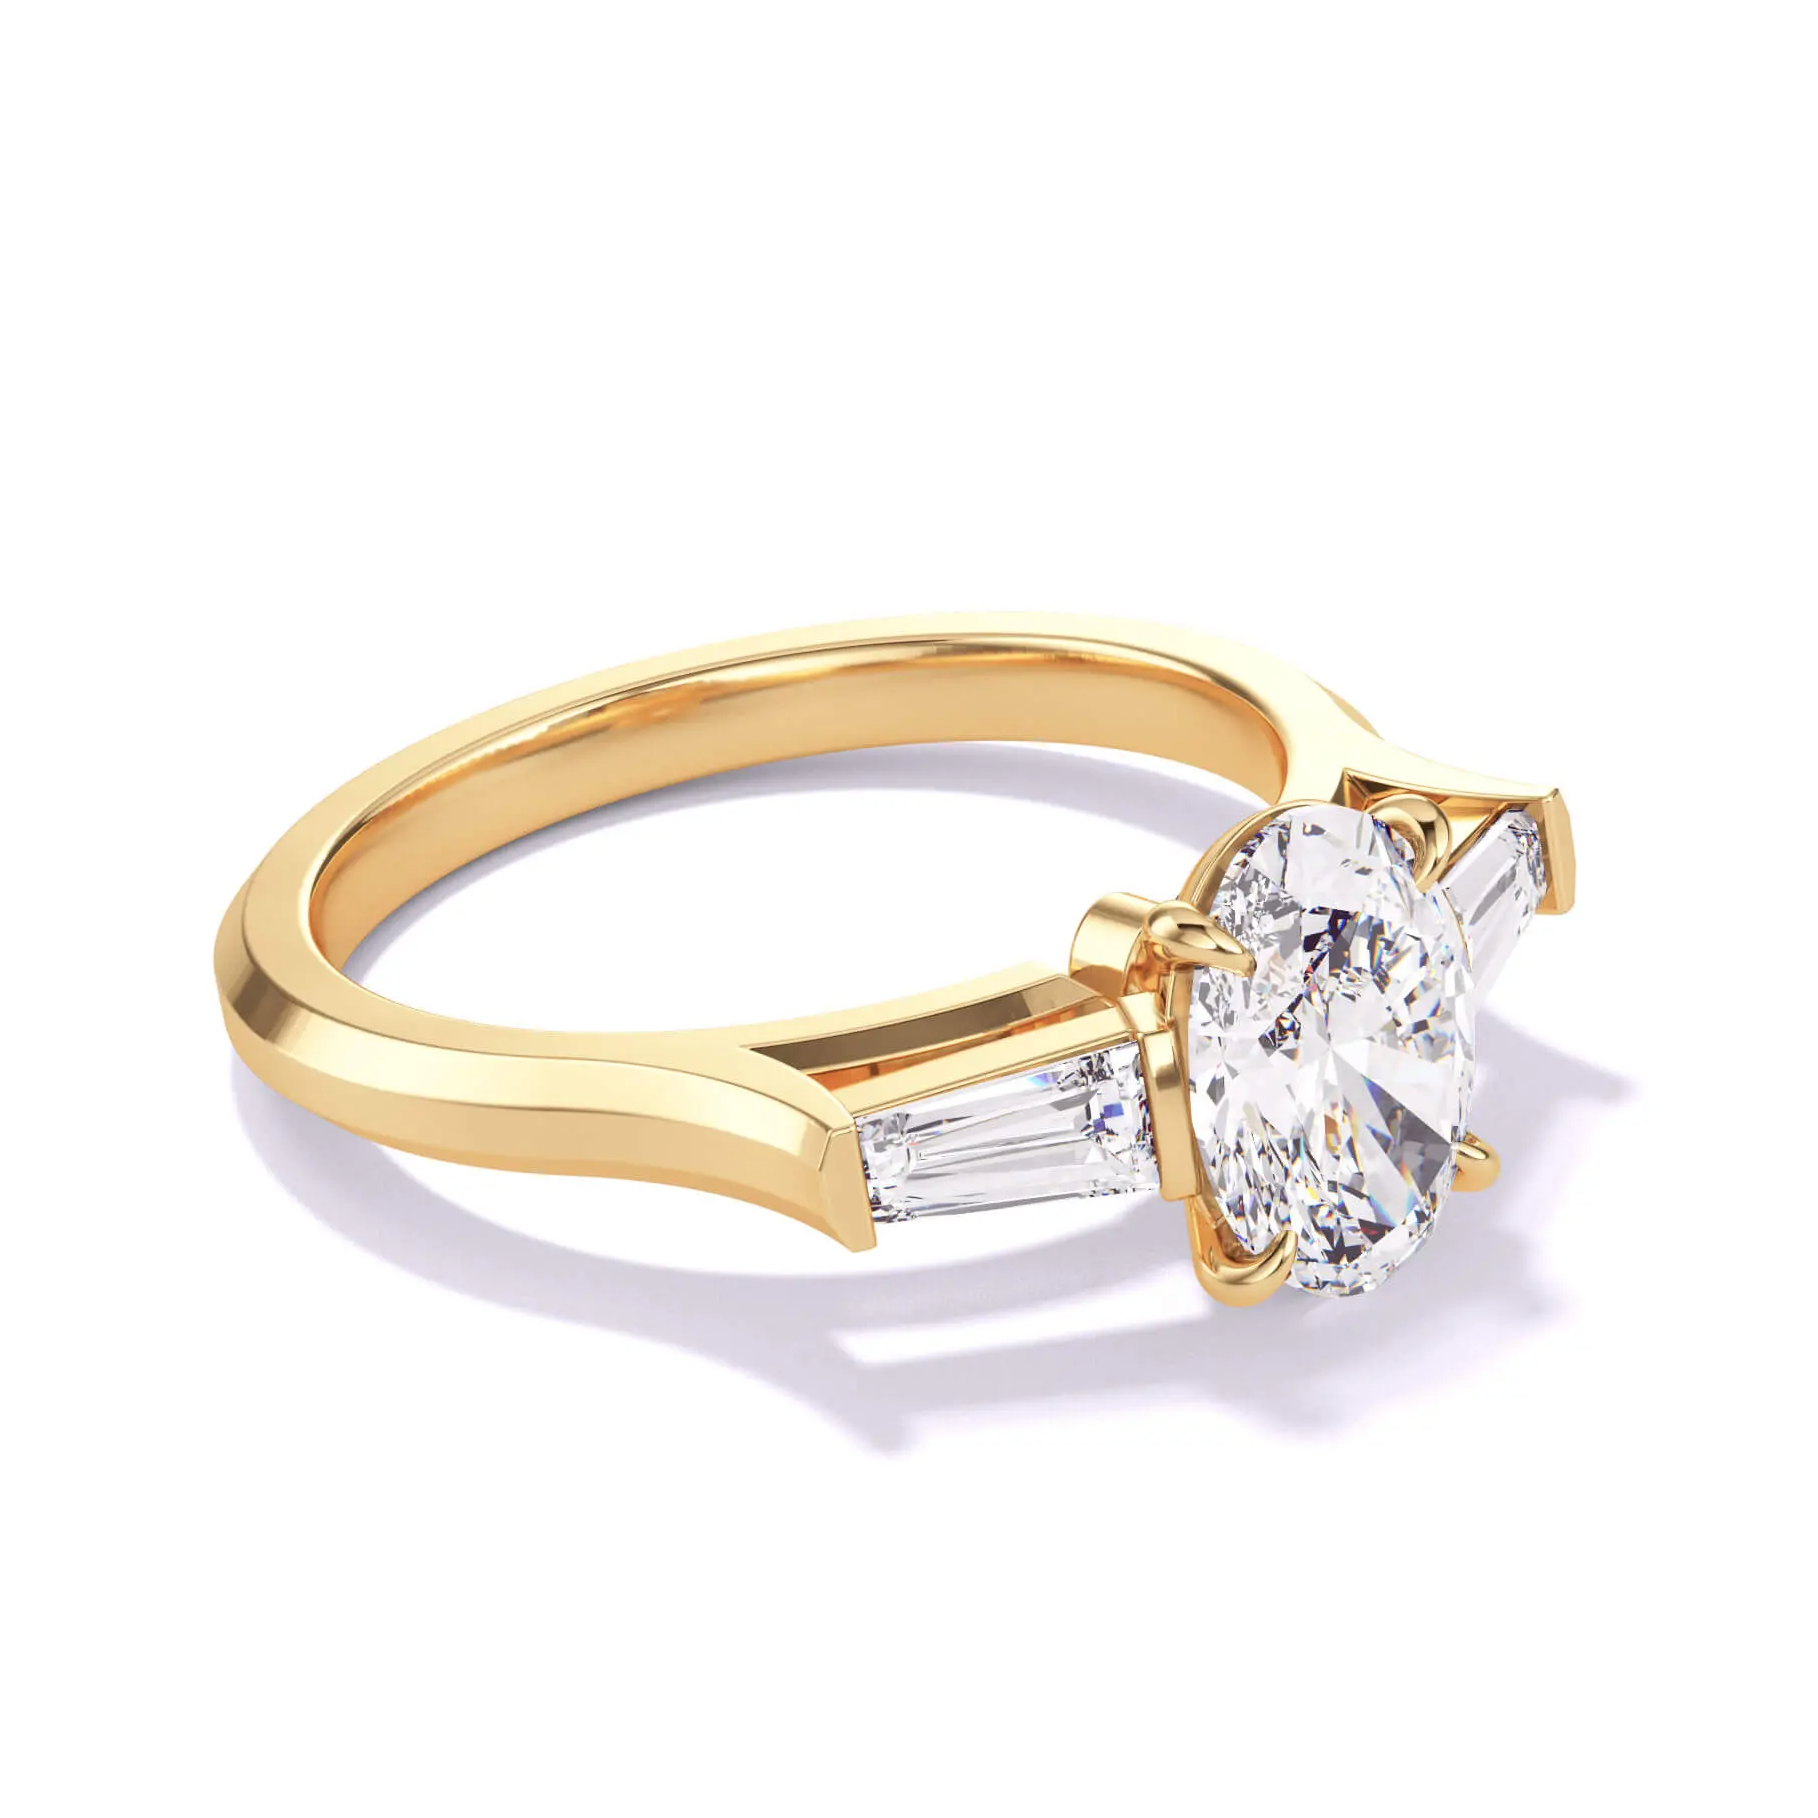 $10,000 diamond engagement ring  - yellow gold oval with baguettes